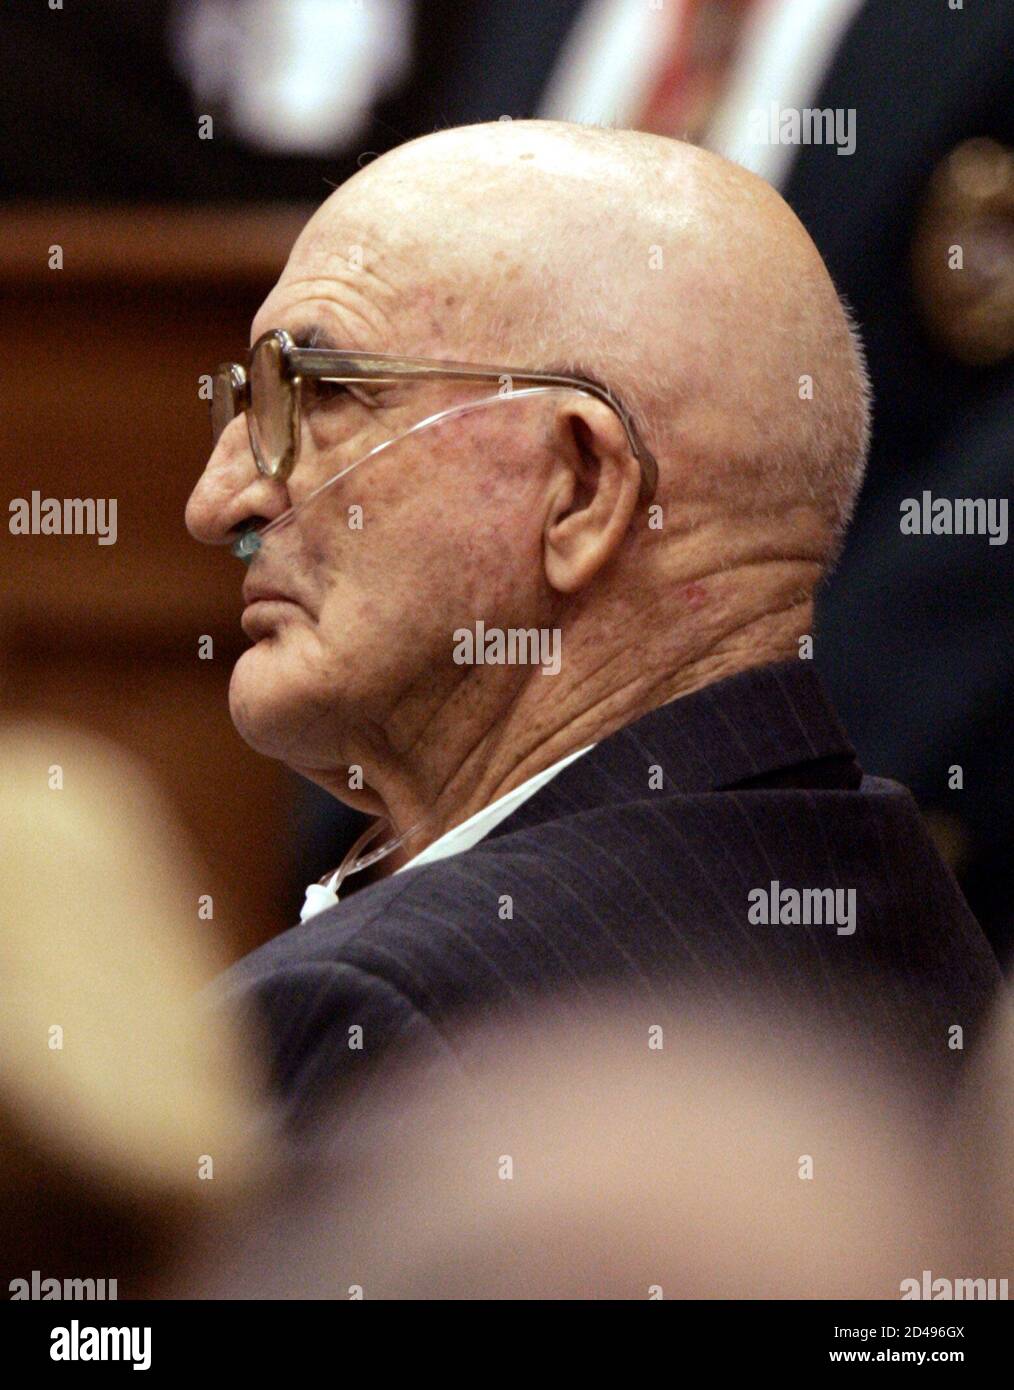 Former Ku Klux Klansman Edgar Ray Killen sits in the courtroom in Philadelphia, Mississippi June 21, 2005 as he is convicted of manslaughter on three counts. Killen was found guilty of manslaughter on Tuesday in the 1964 killings of three civil rights workers, a case that outraged much of the country and energized the civil rights movement. REUTERS/Rogelio Solis/Pool  RVS/CN Stock Photo